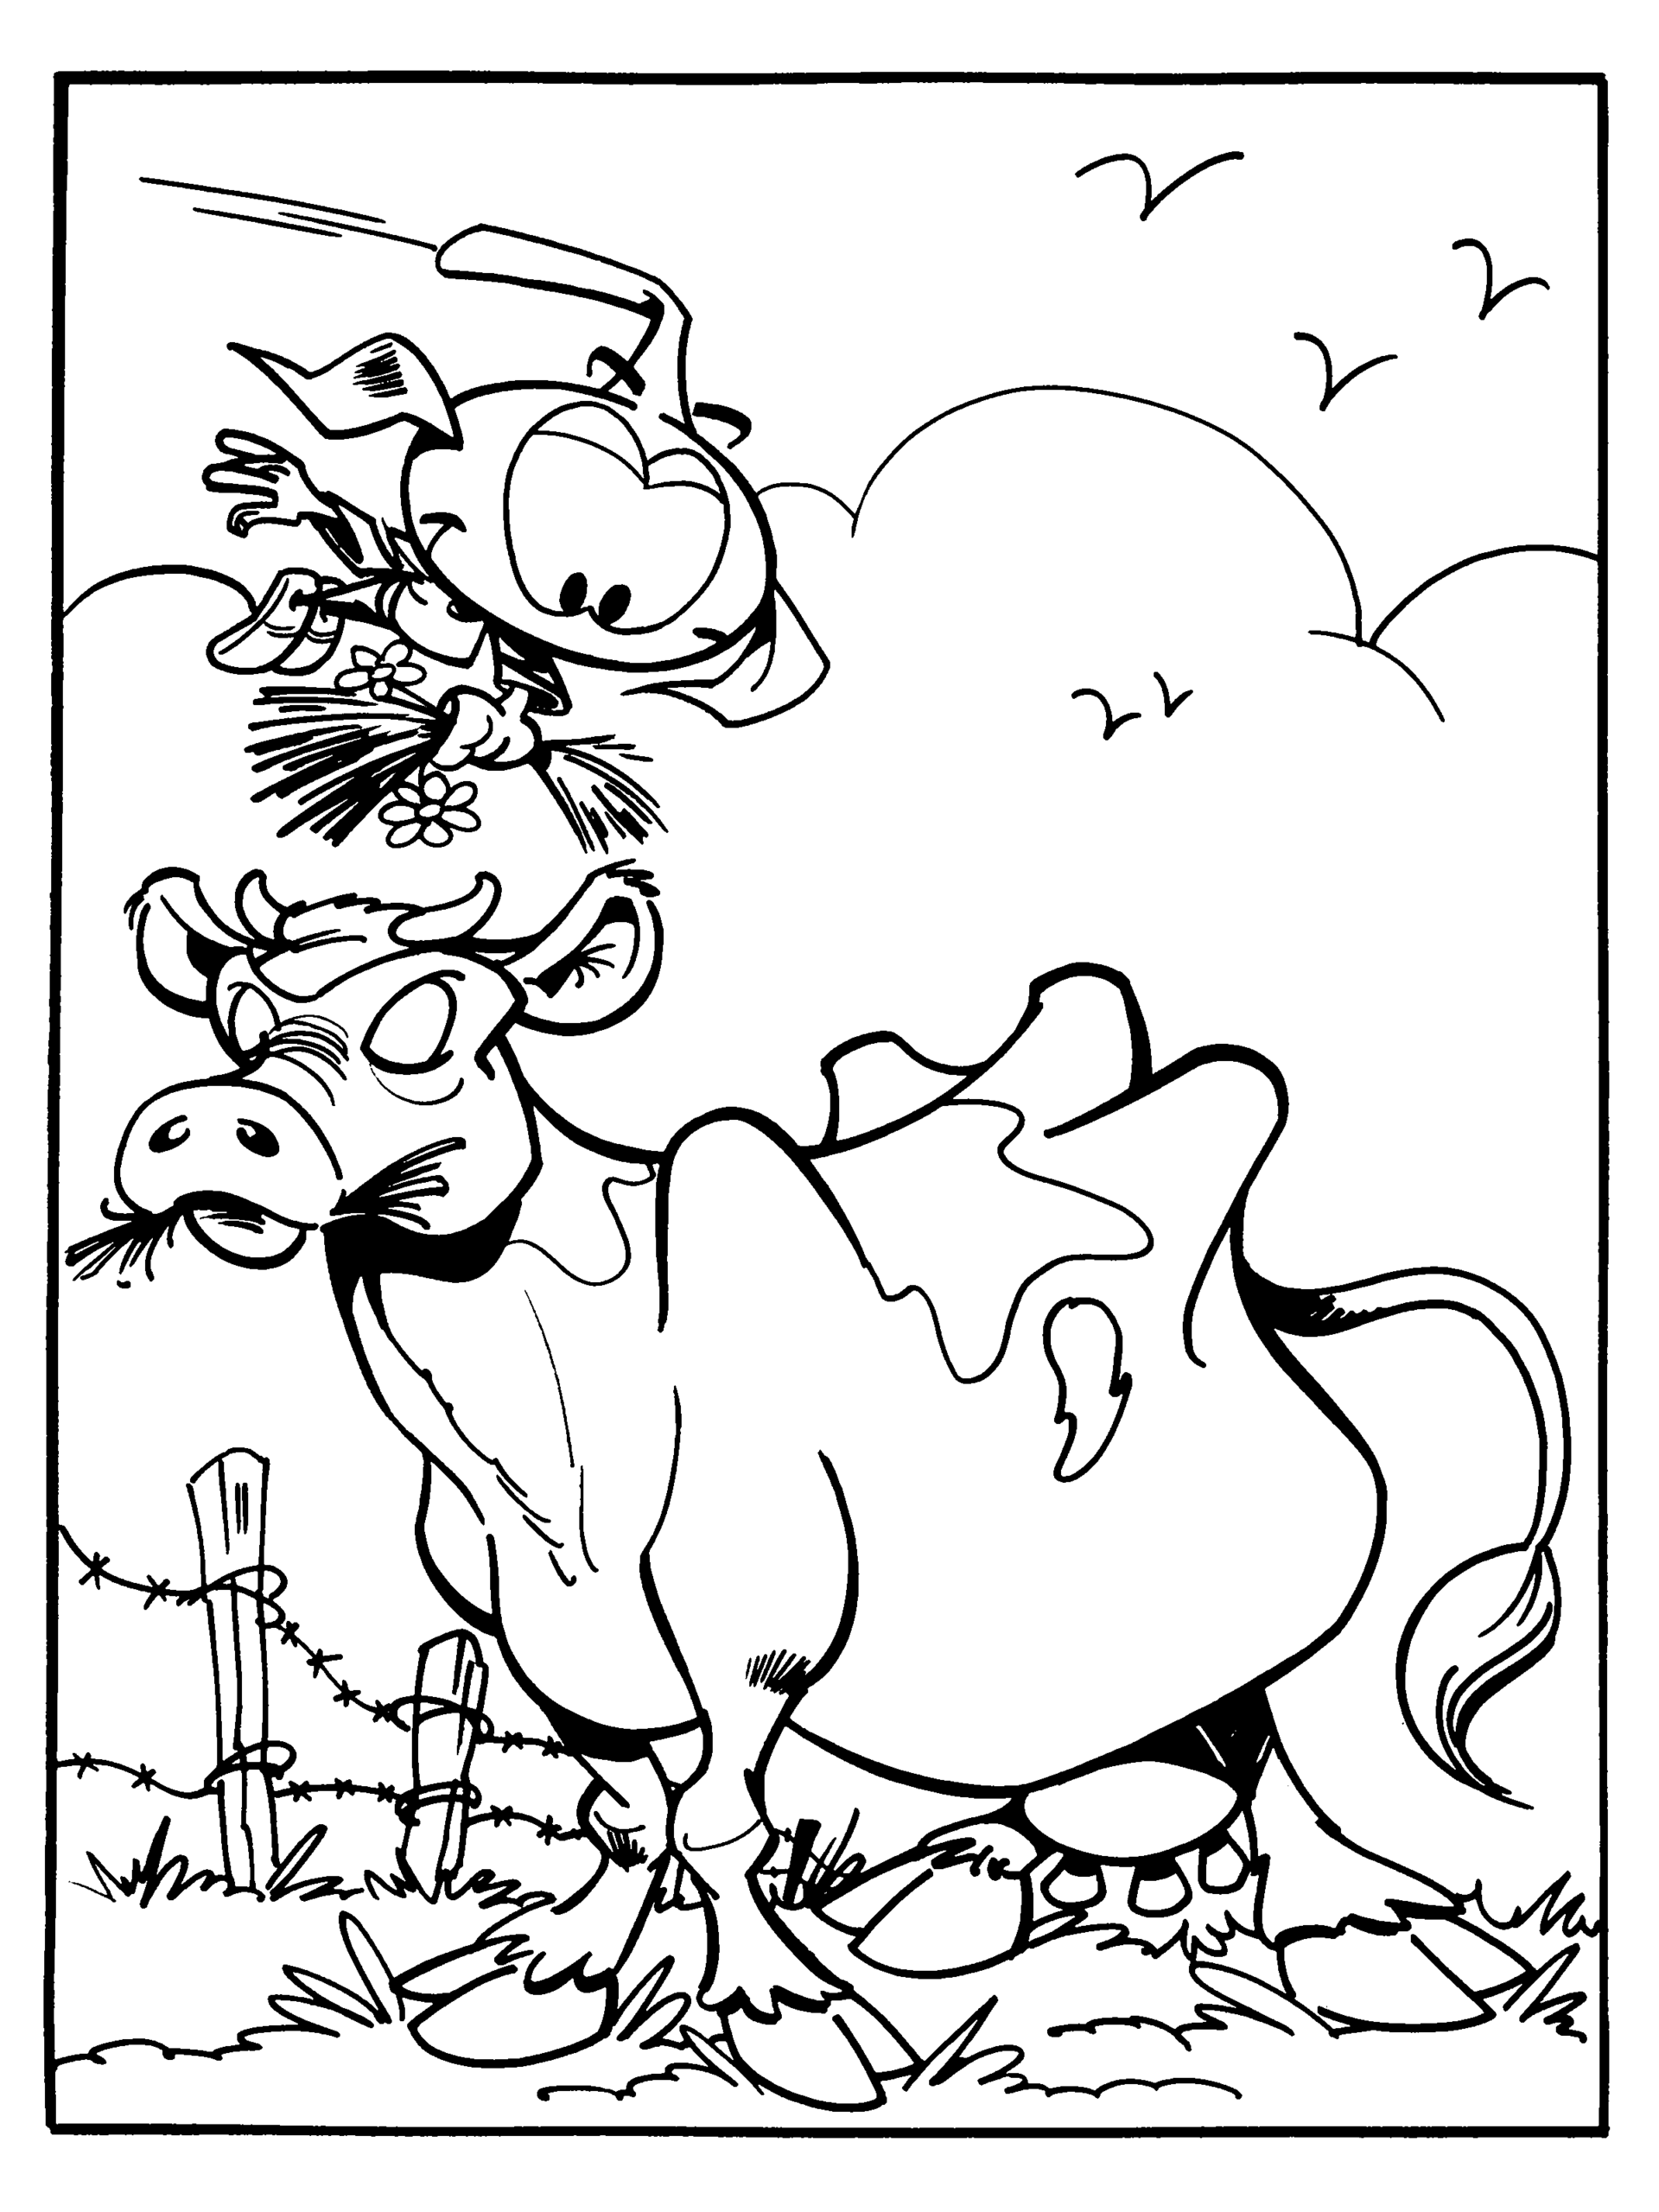 Snorks Coloring Pages TV Film snorks 16 Printable 2020 07648 Coloring4free